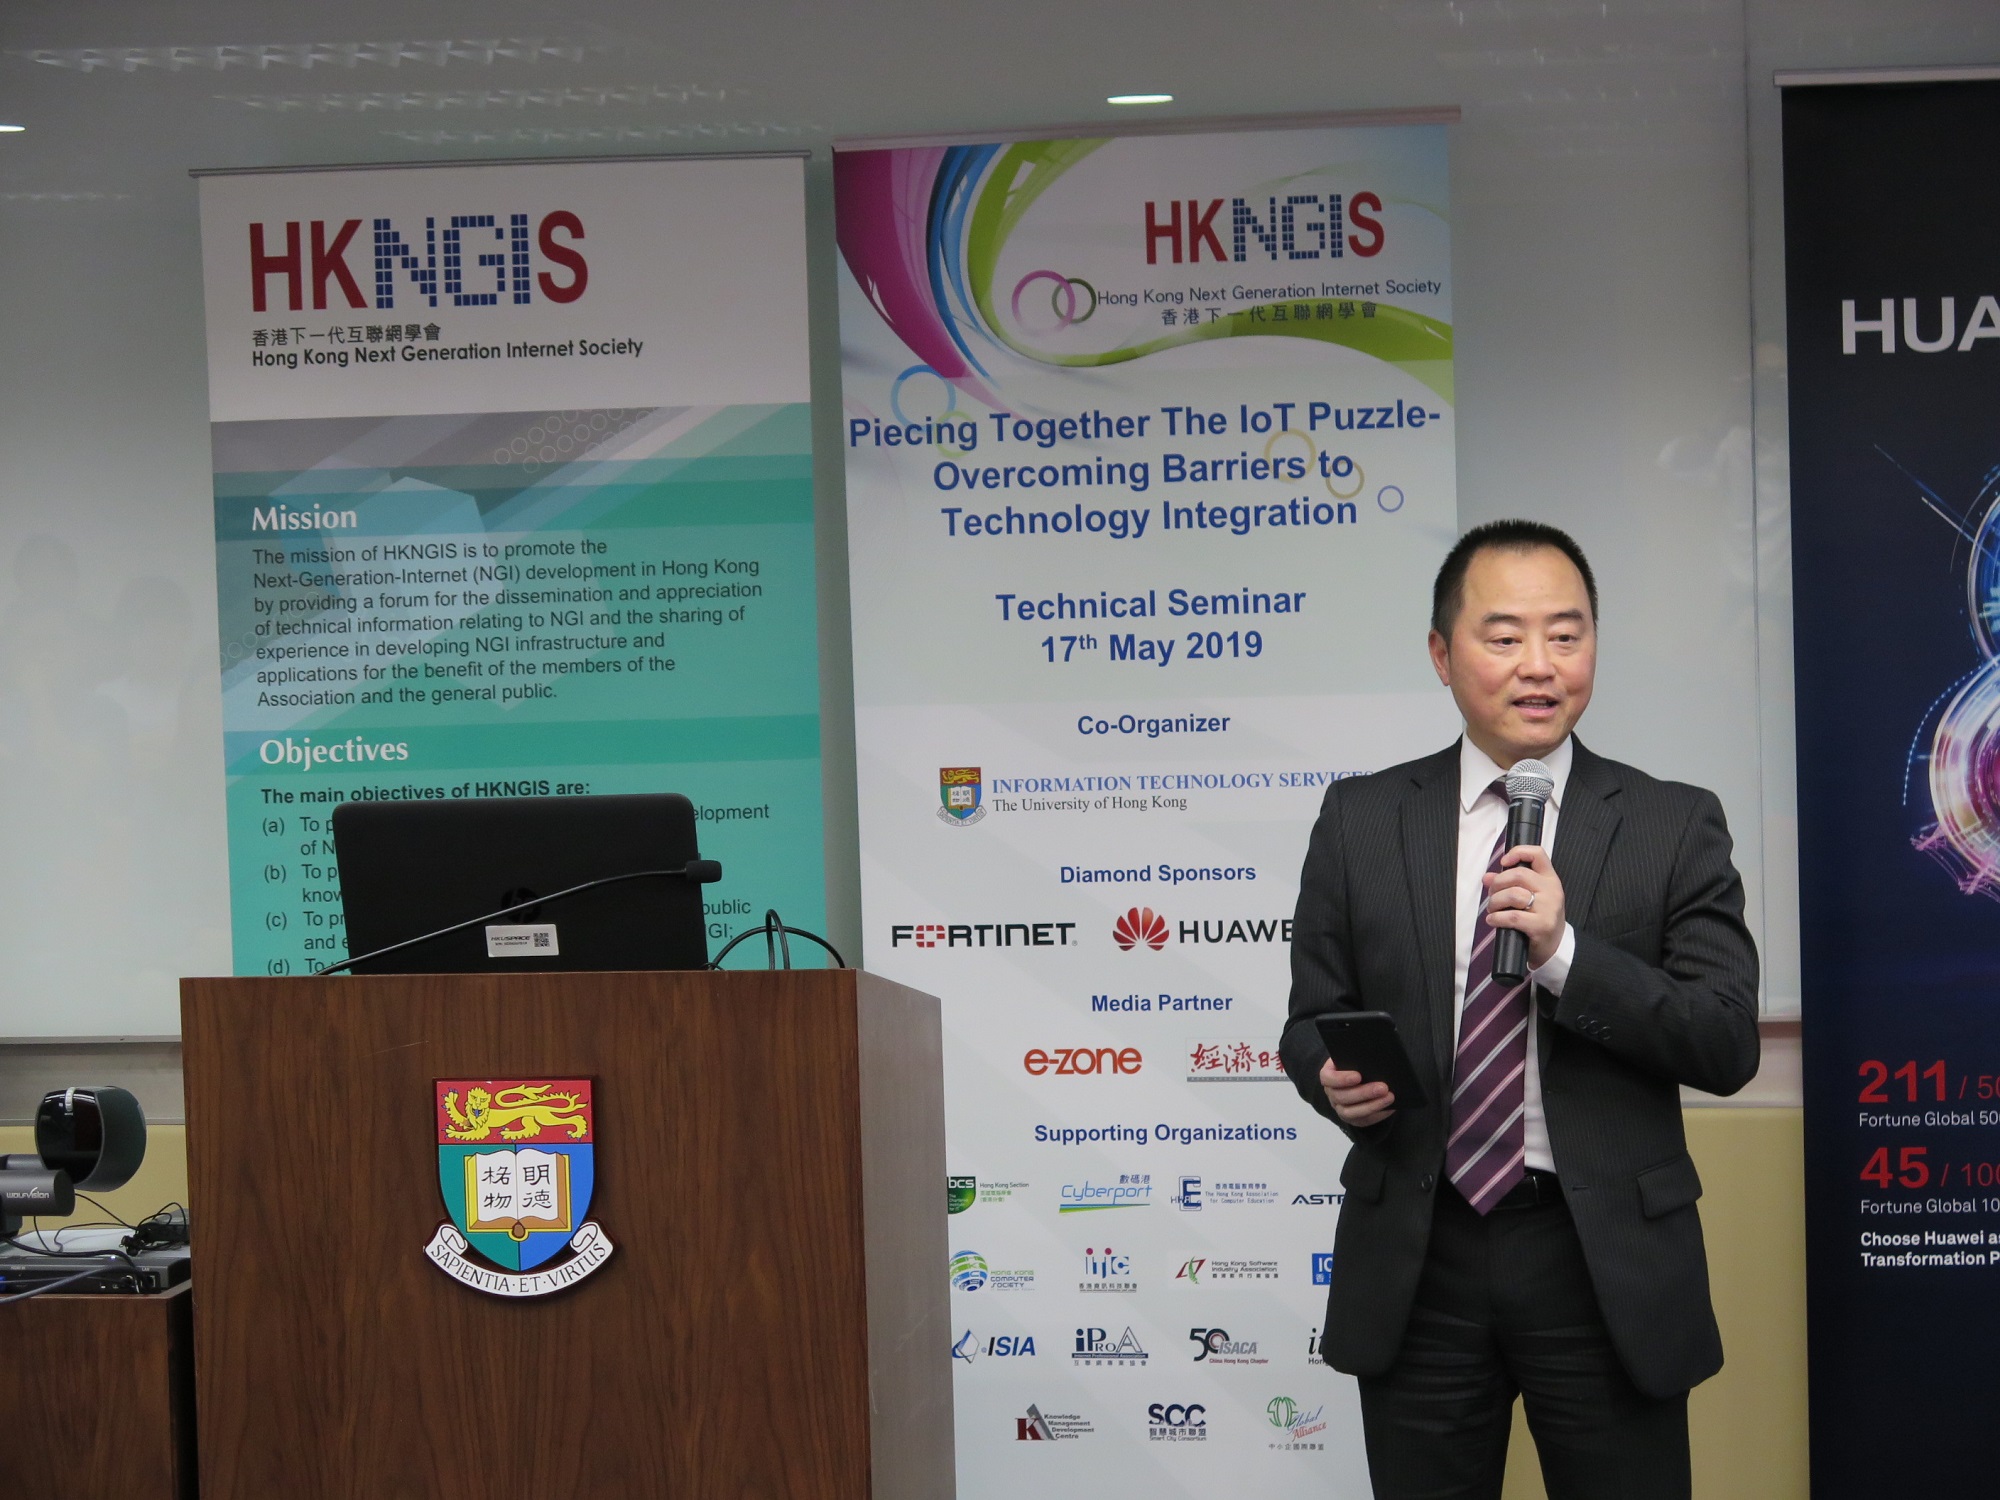 Mr. Tony Wong, Assistant Government Chief Information Officer (Industry Development), delivers Speech at the Technical Seminar on “Piecing Together the IoT Puzzle – Overcoming Barriers to Technology Integration”.